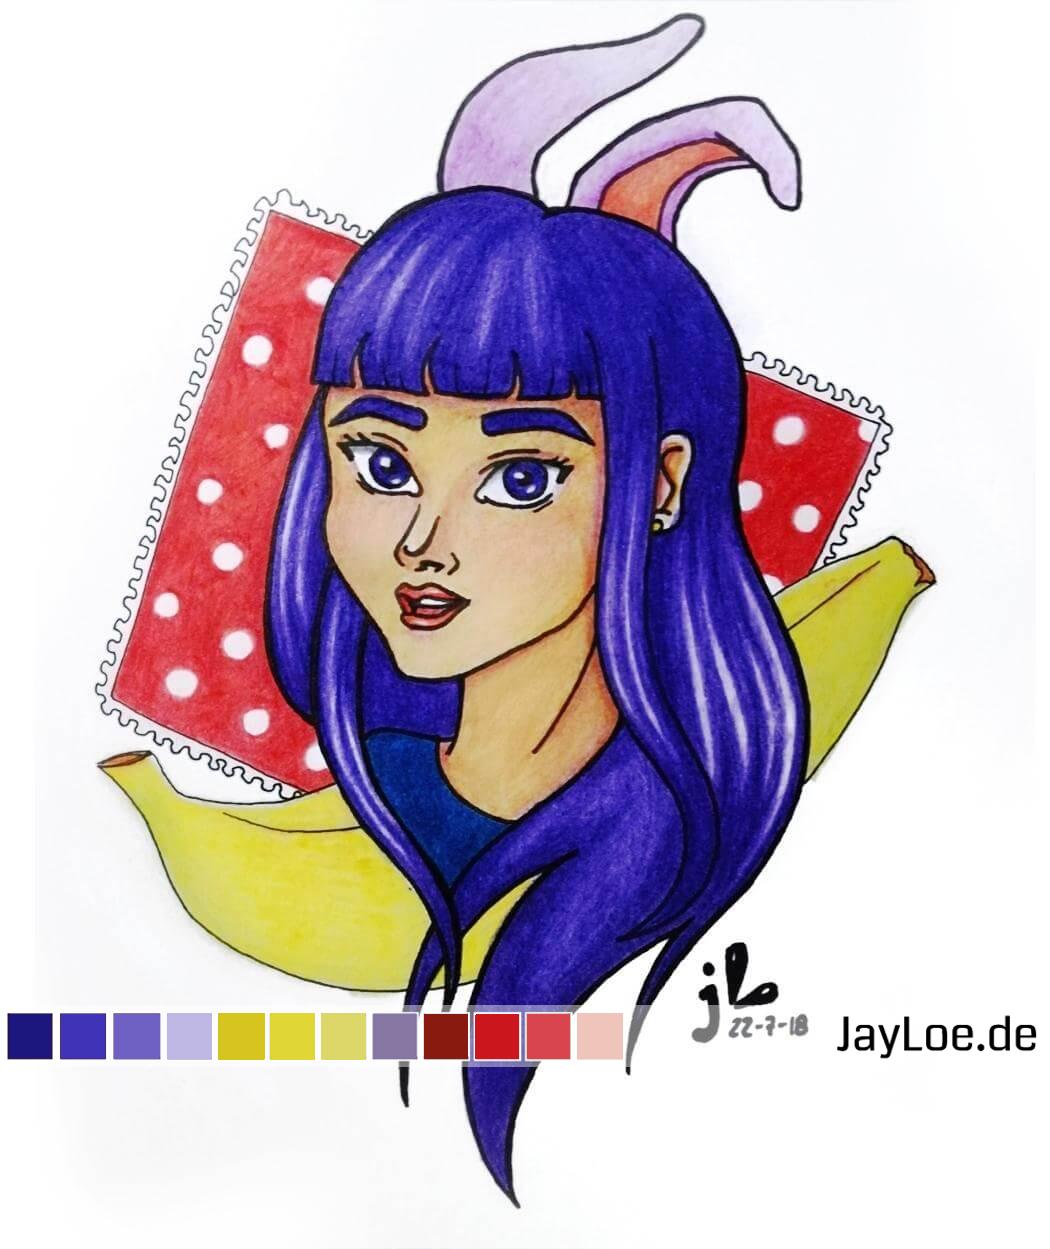 Character from Baylee Jaes (YouTube)redraw challenge